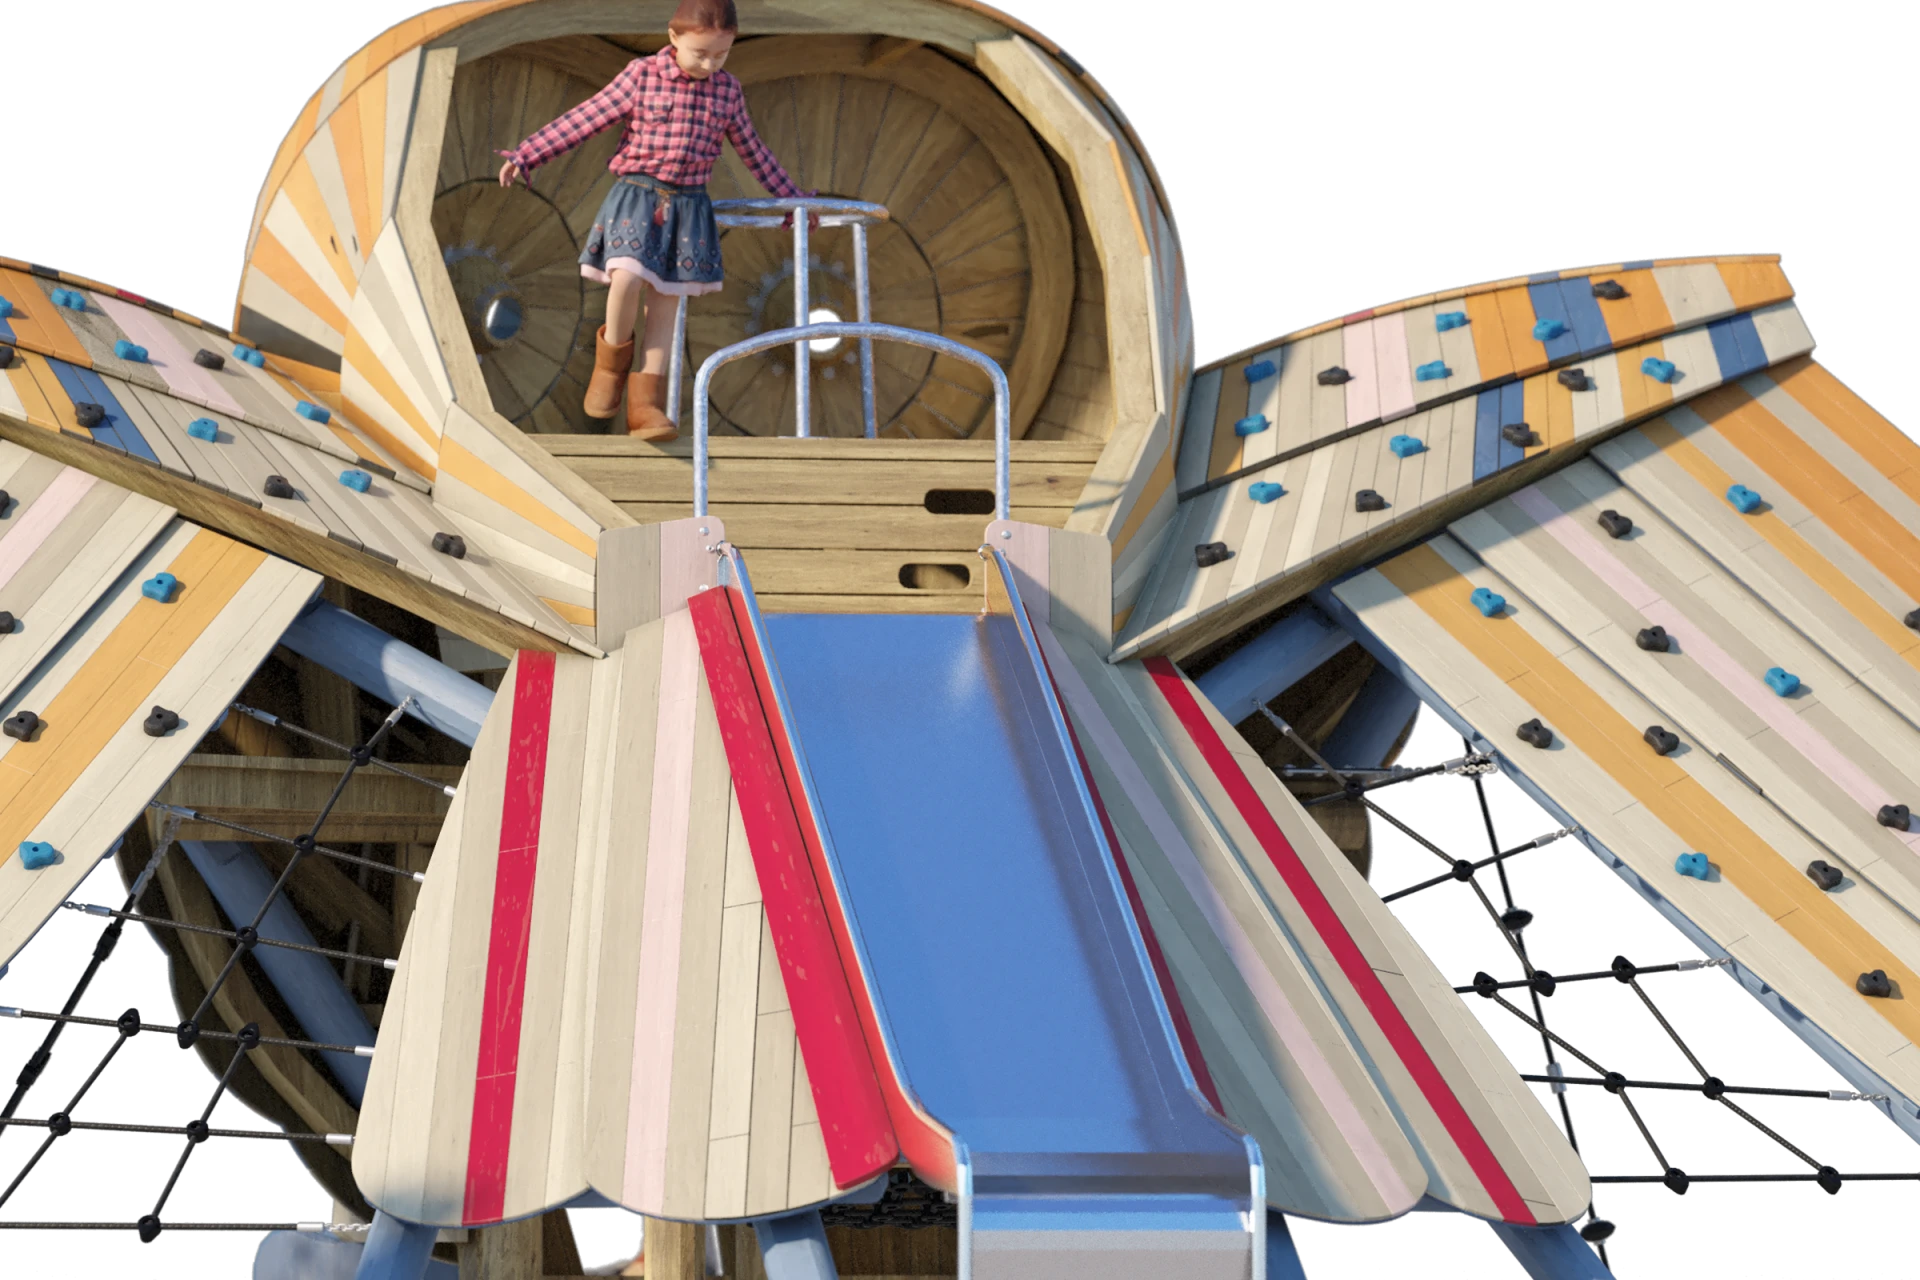 Design rendering of a child getting ready to slide down a wooden owl play structure